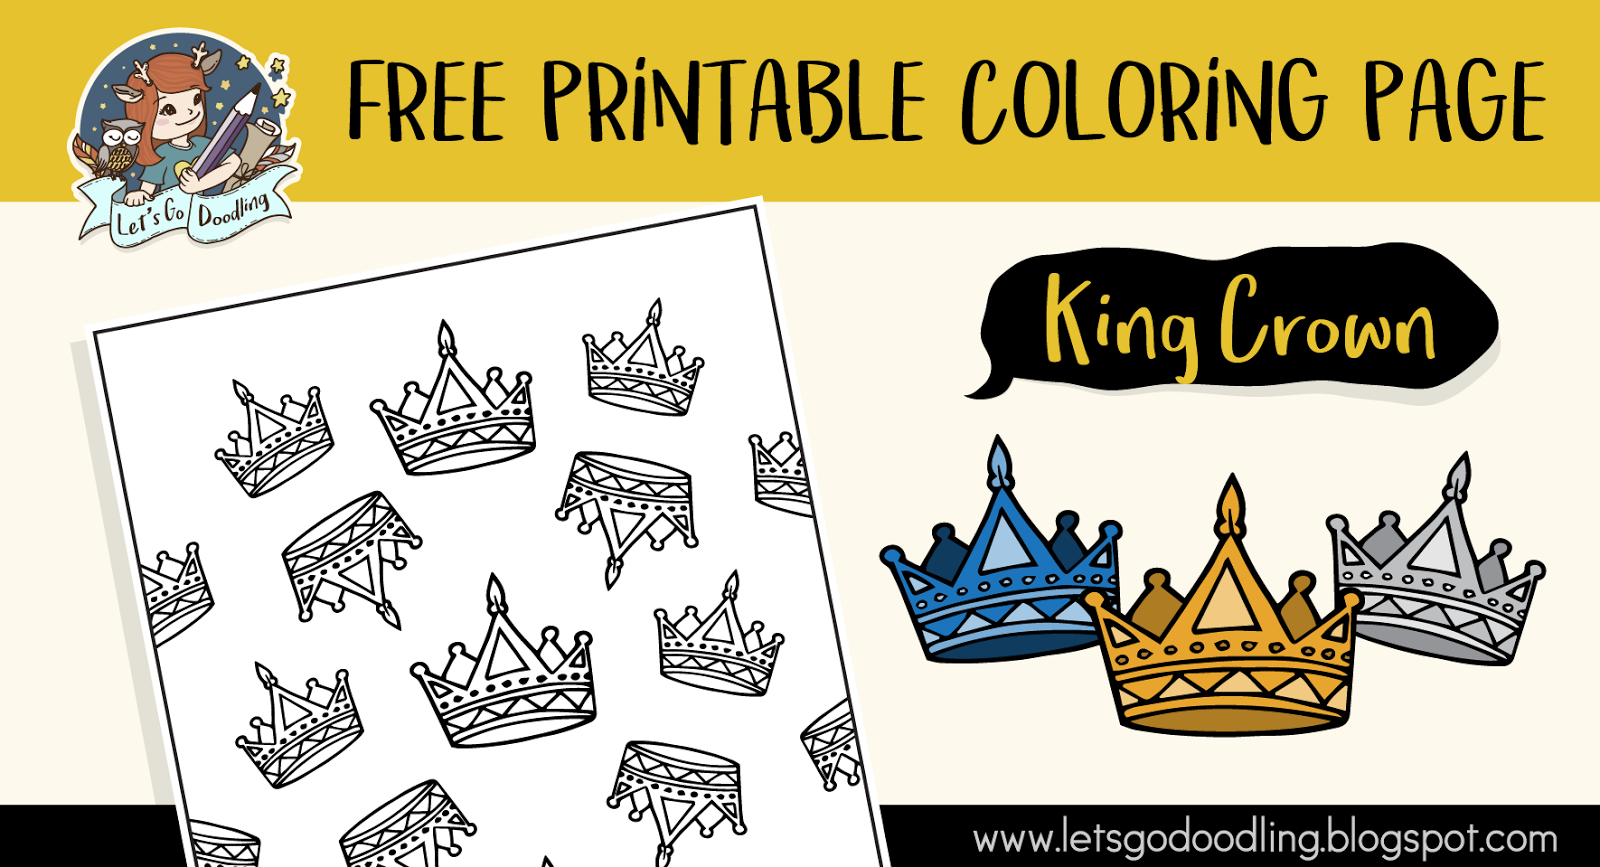  How To Draw A King Crown Step By Step of all time The ultimate guide 